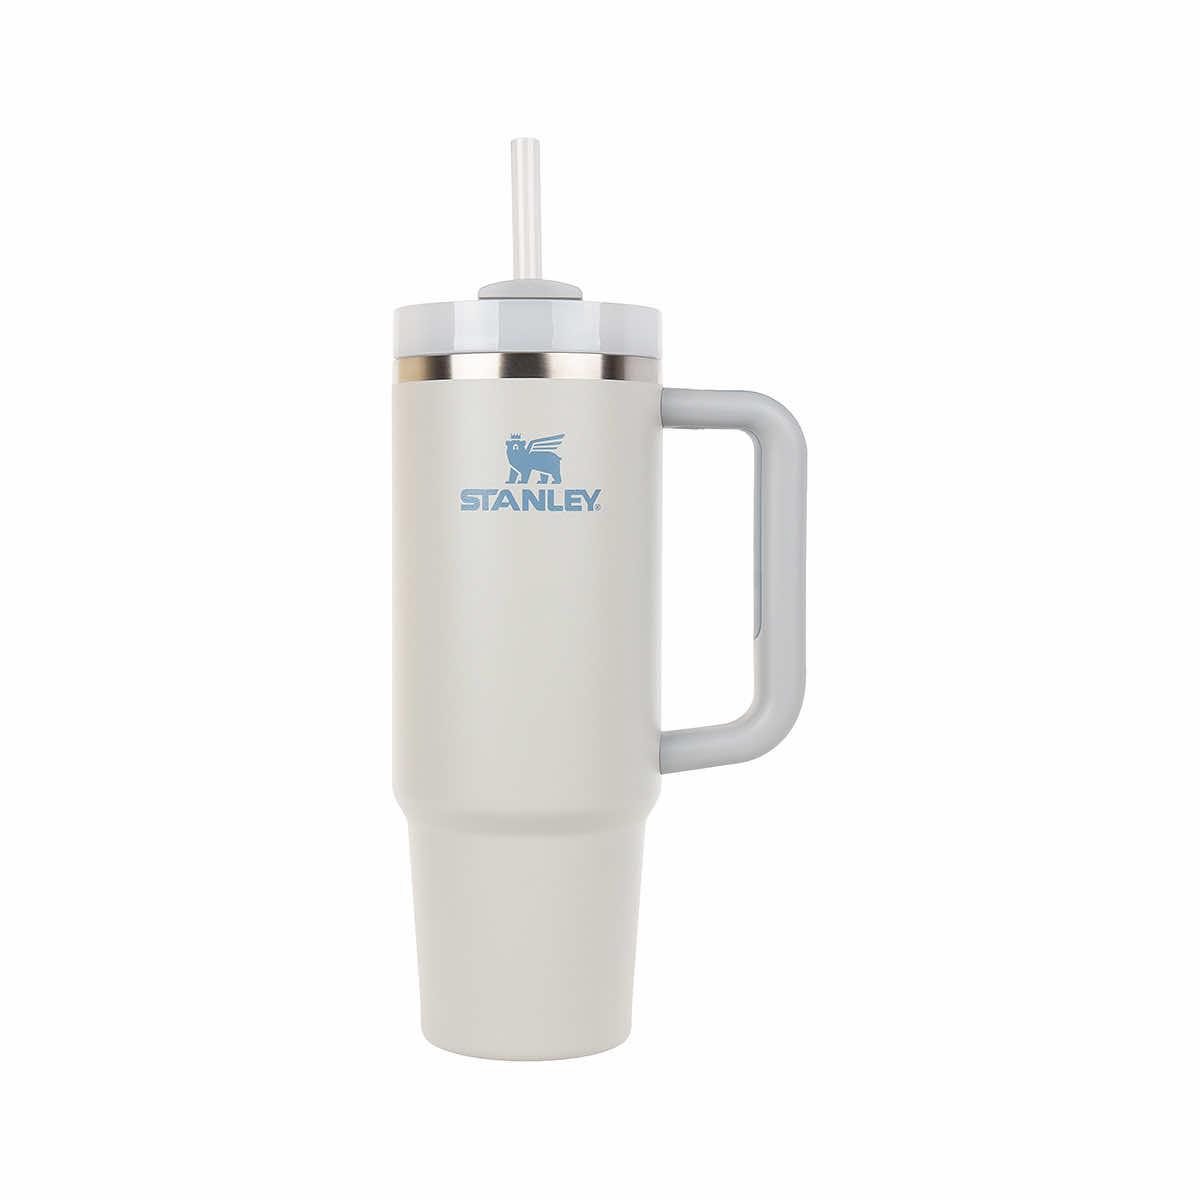 The Quencher H2.0 Flowstate™,Stainless Steel Tumbler 30 OZ Cream